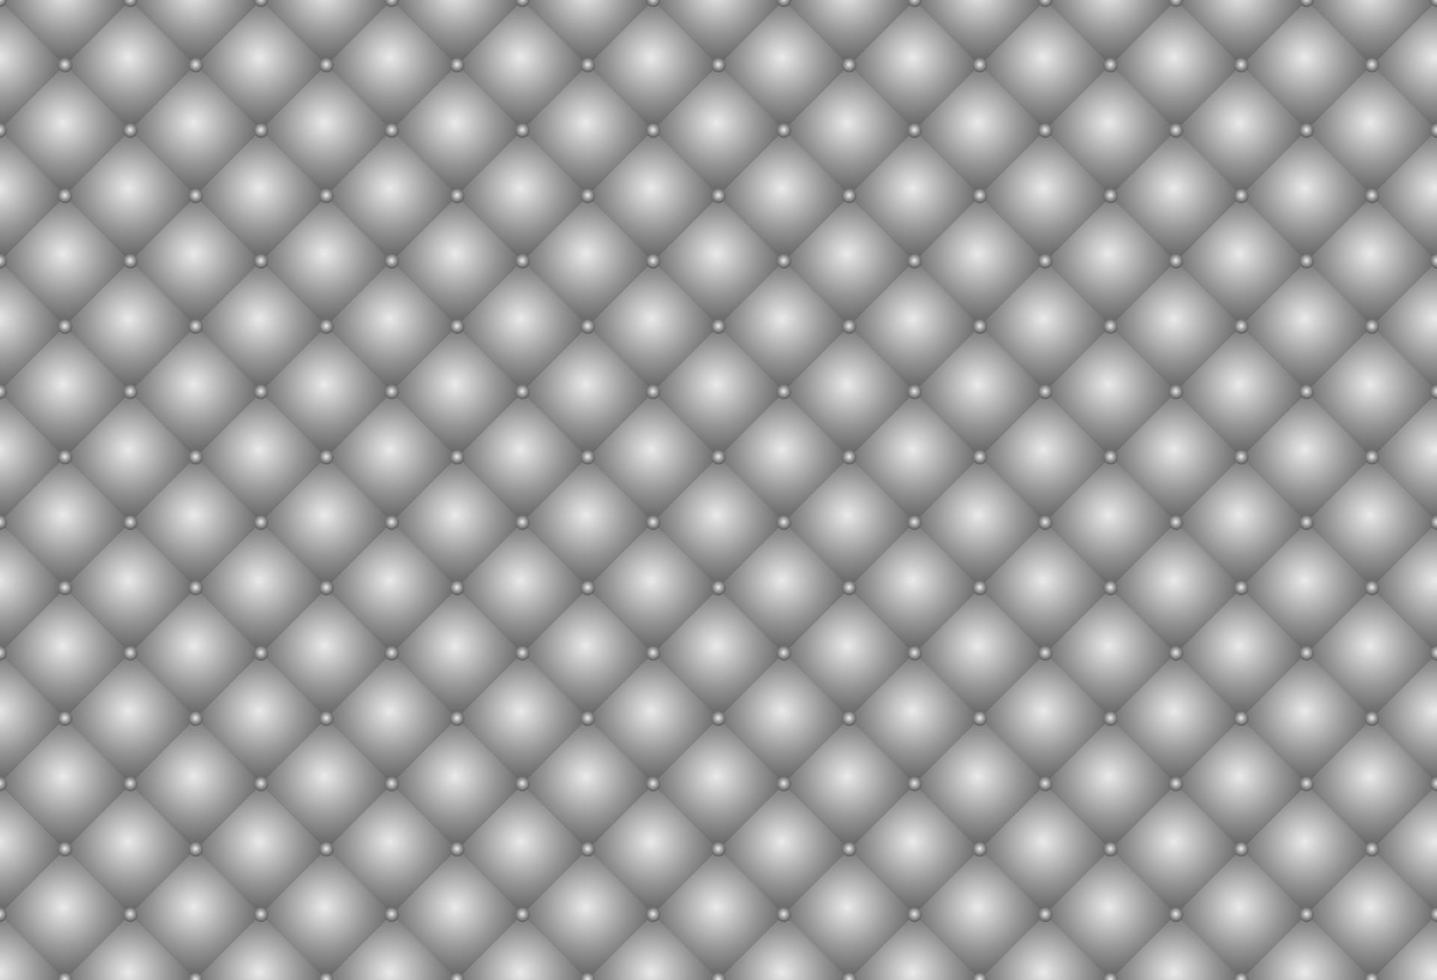 3d shiny silver upholstery leather texture vector background. Metallic gradient quilted squares with silver beads seamless pattern grid.